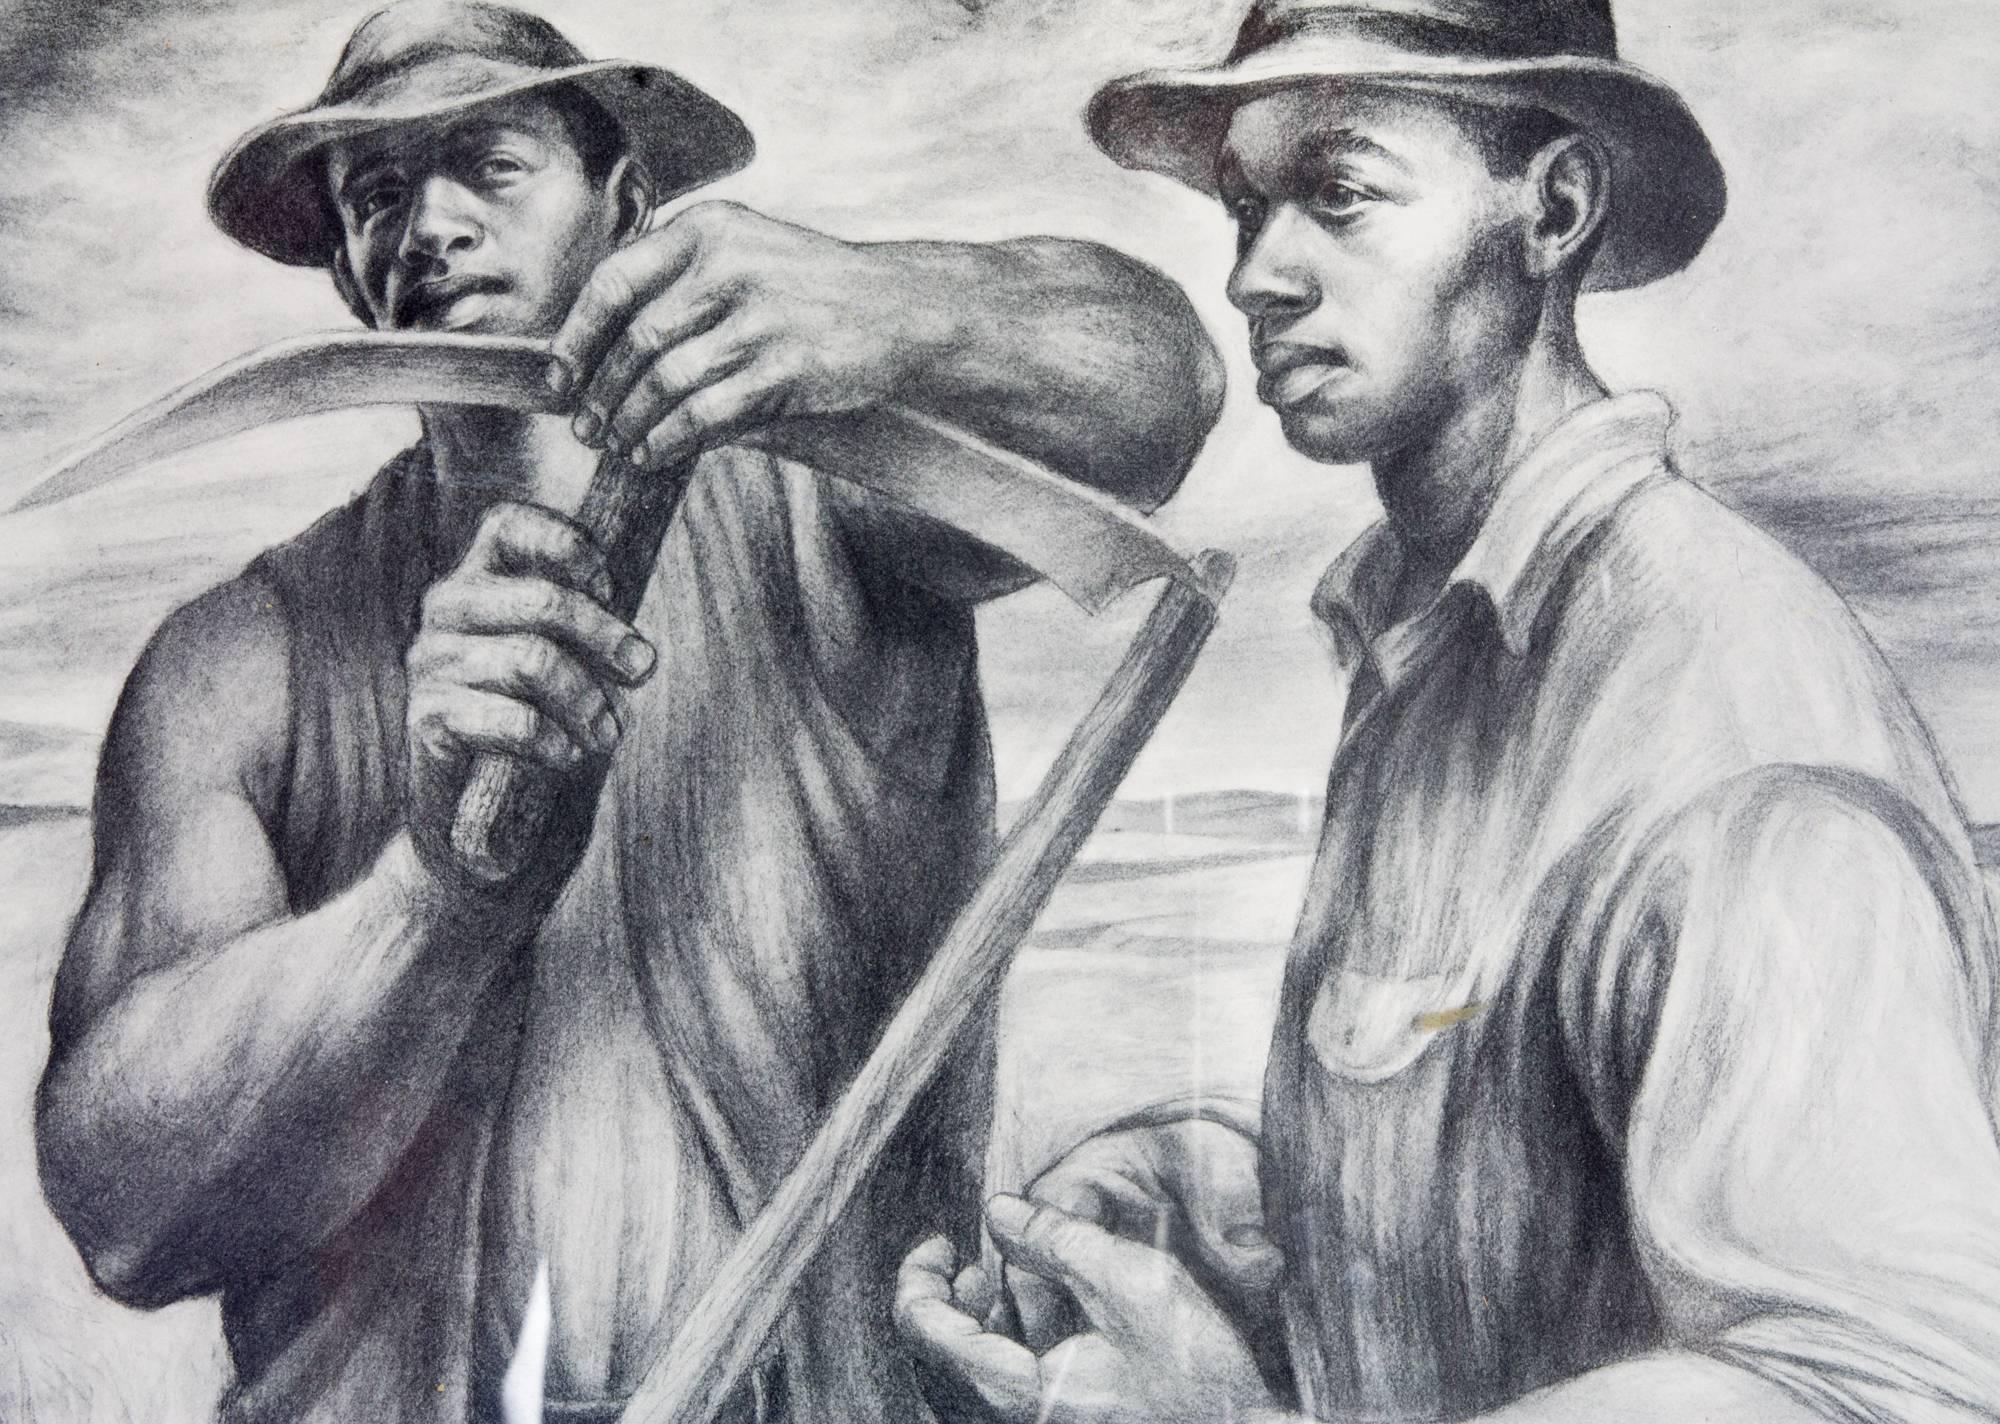 'Harvest Talk' by Charles White as part of a collection of six lithographs published in 1953. Plate signed in lower right corner. 

Born in Chicago in 1918, Charles W. White is one of America's most renowned and recognized African-American and